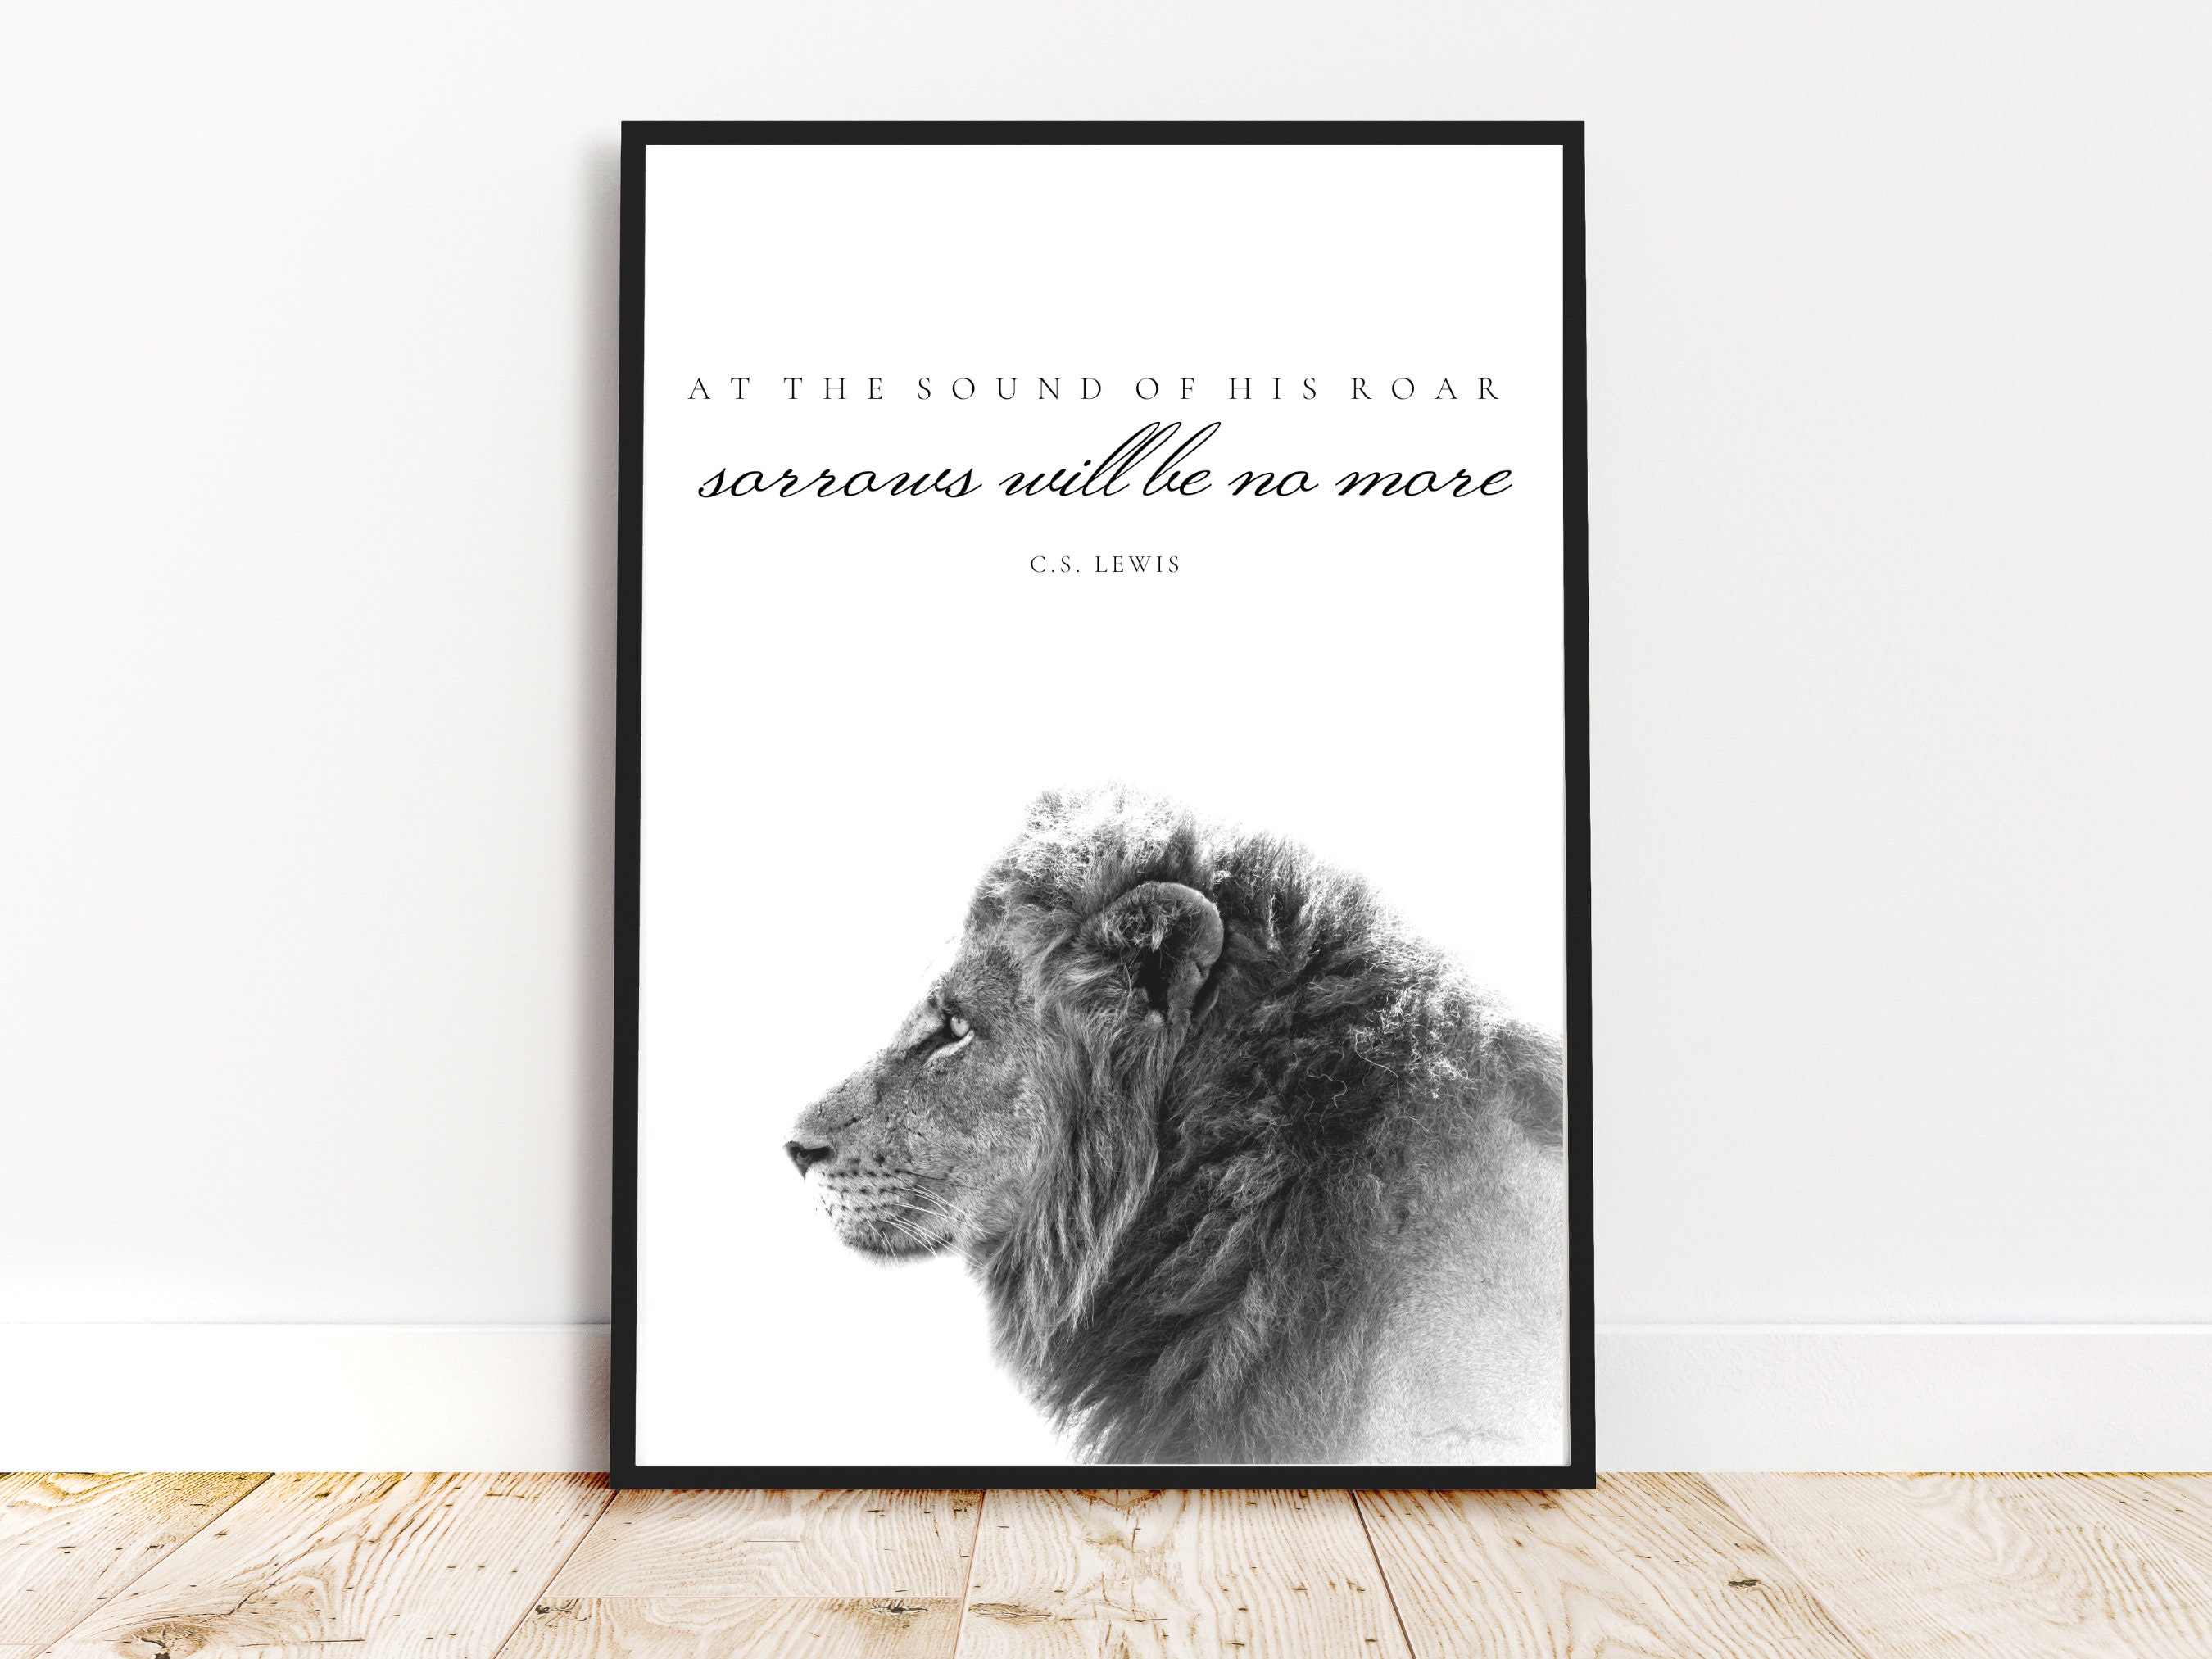  DigTour WallArt Chronicles of Narnia Aslan Safe Wall Quote  Vinyl Wall Decal Inspirational Wall Sticker Words Wall Graphic Home Art  Decoration Dark Brown : Tools & Home Improvement